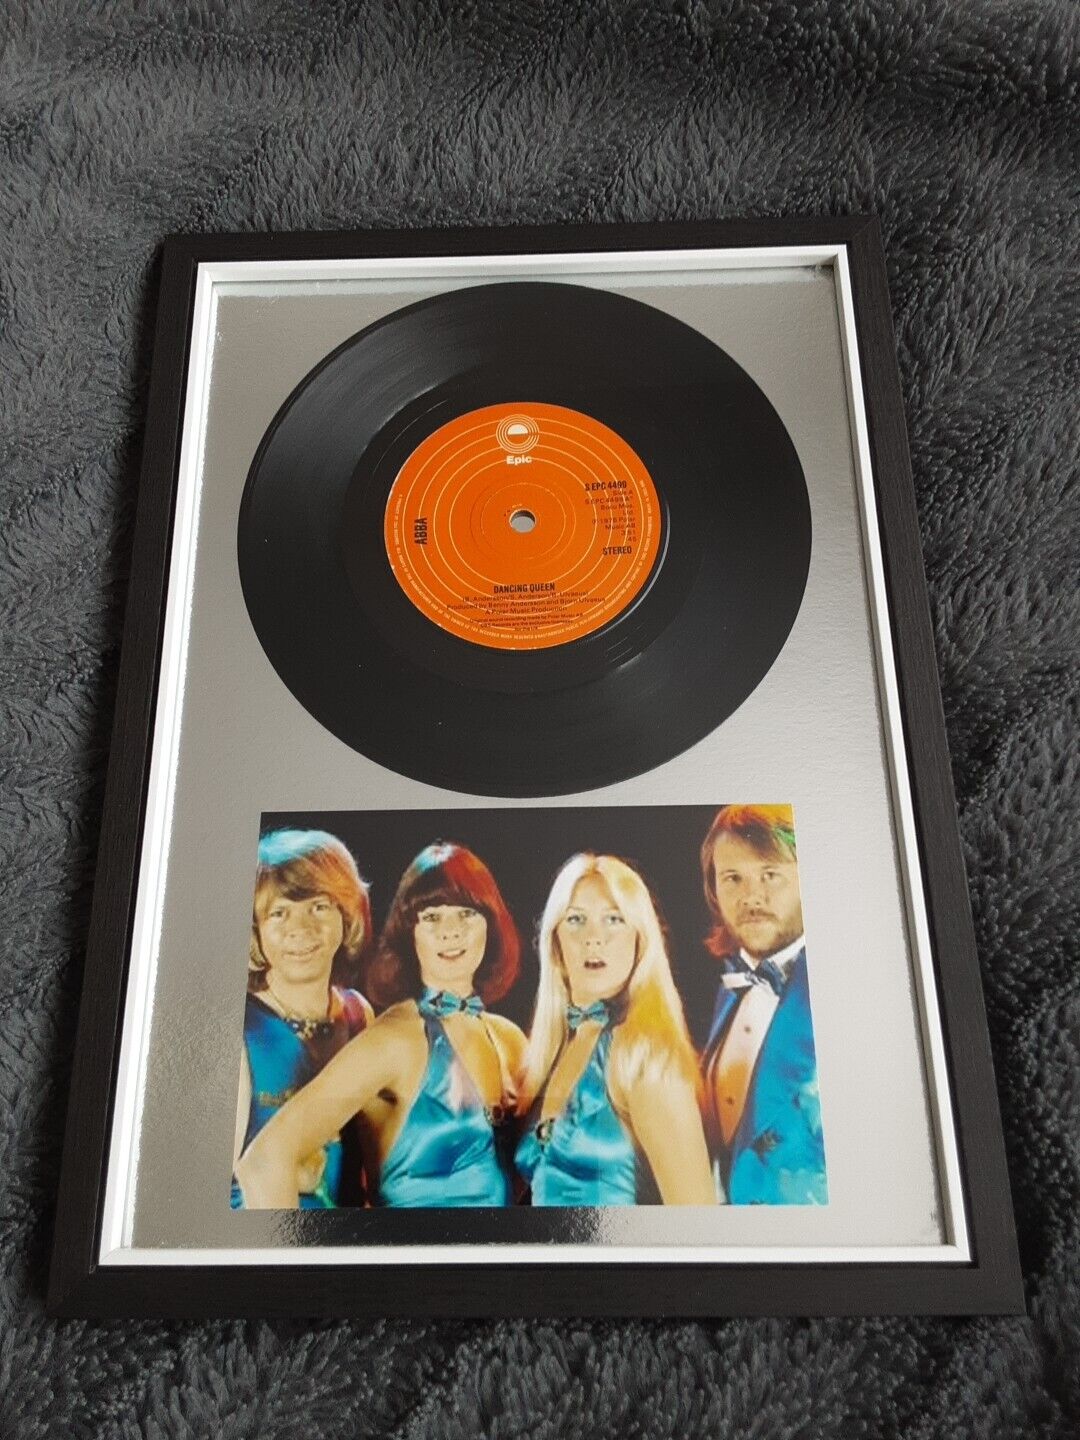 1976 ABBA DANCING QUEEN 7" VINYL RECORD PLUS 6" X 4"  BAND PHOTO FRAMED